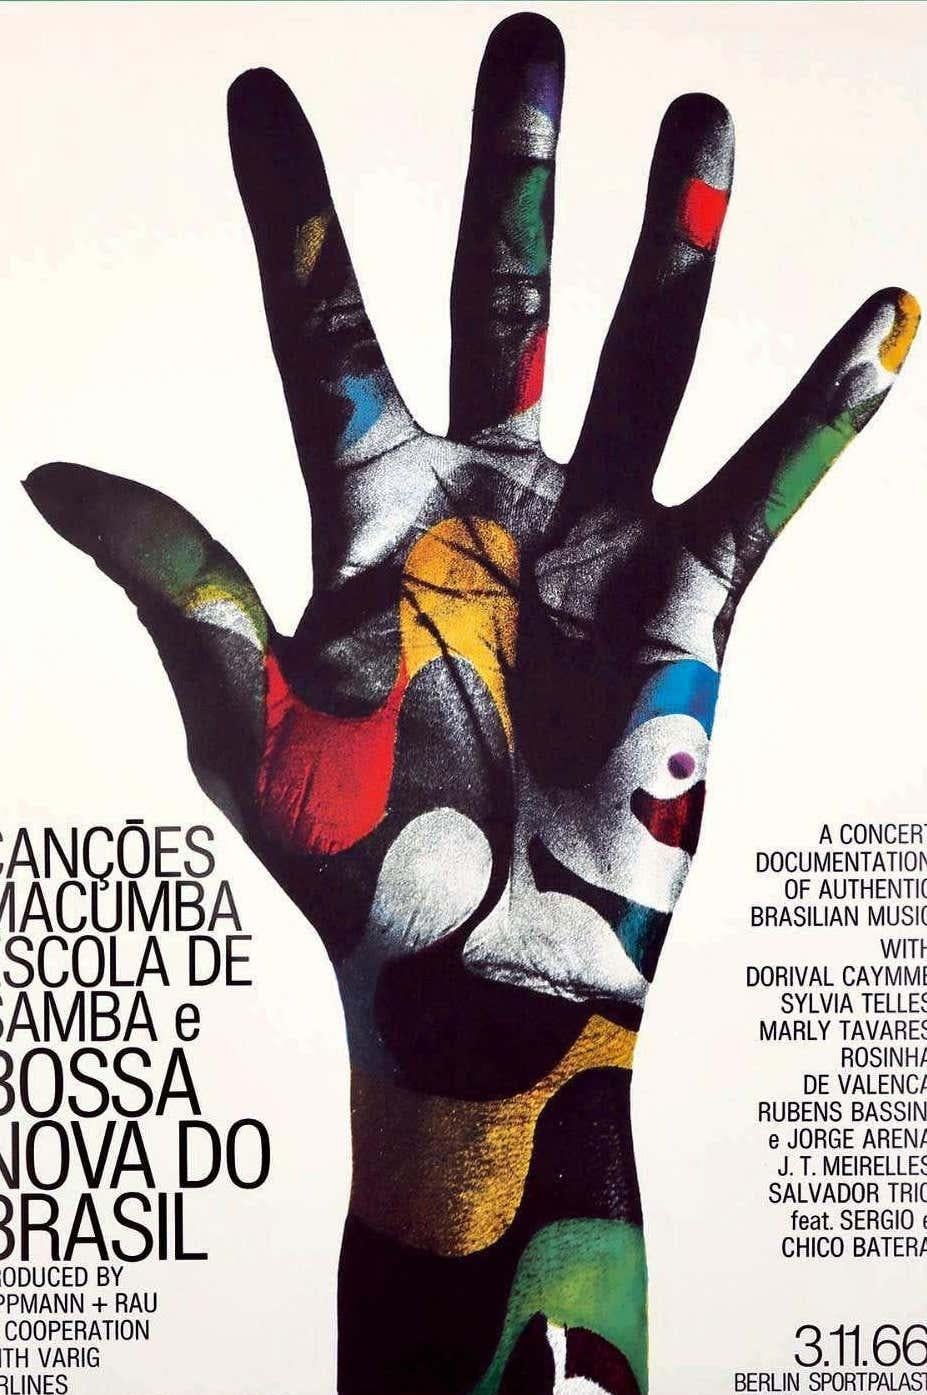 Bossa Nova do Brasil by Gunther Kieser 1966:
Keiser's extraordinary posters are the result of creating images from solid forms, like sculpture or collage, which he then photographs. A great music lover, he was fortunate to become associated with